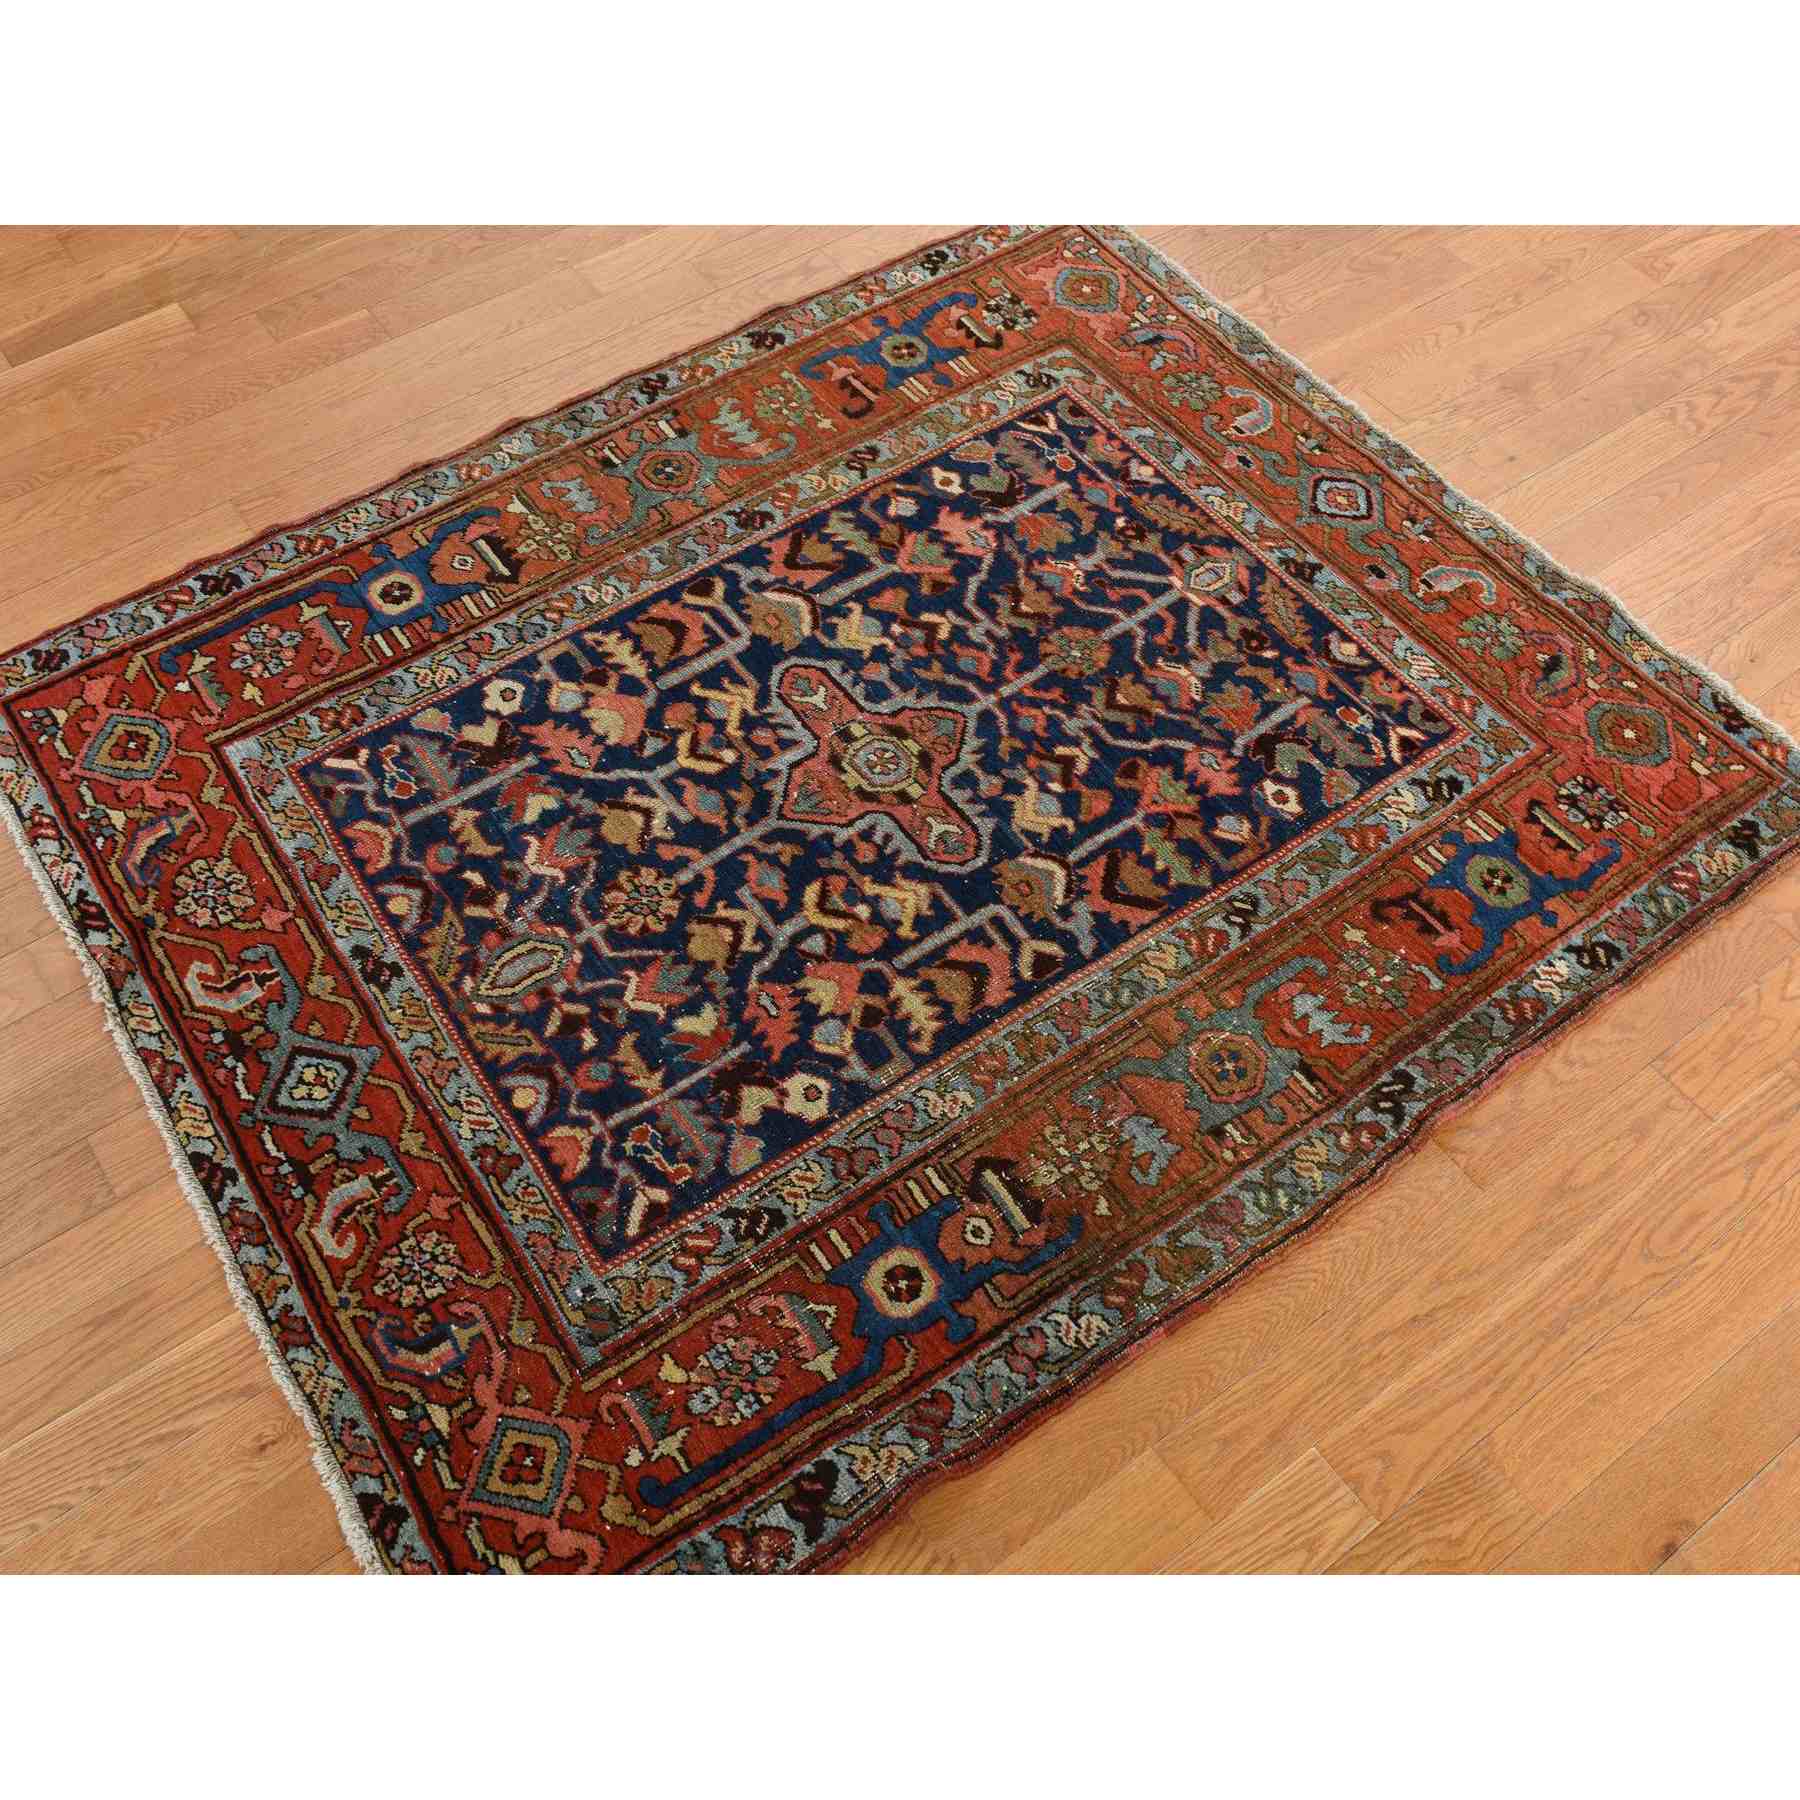 Antique-Hand-Knotted-Rug-390920